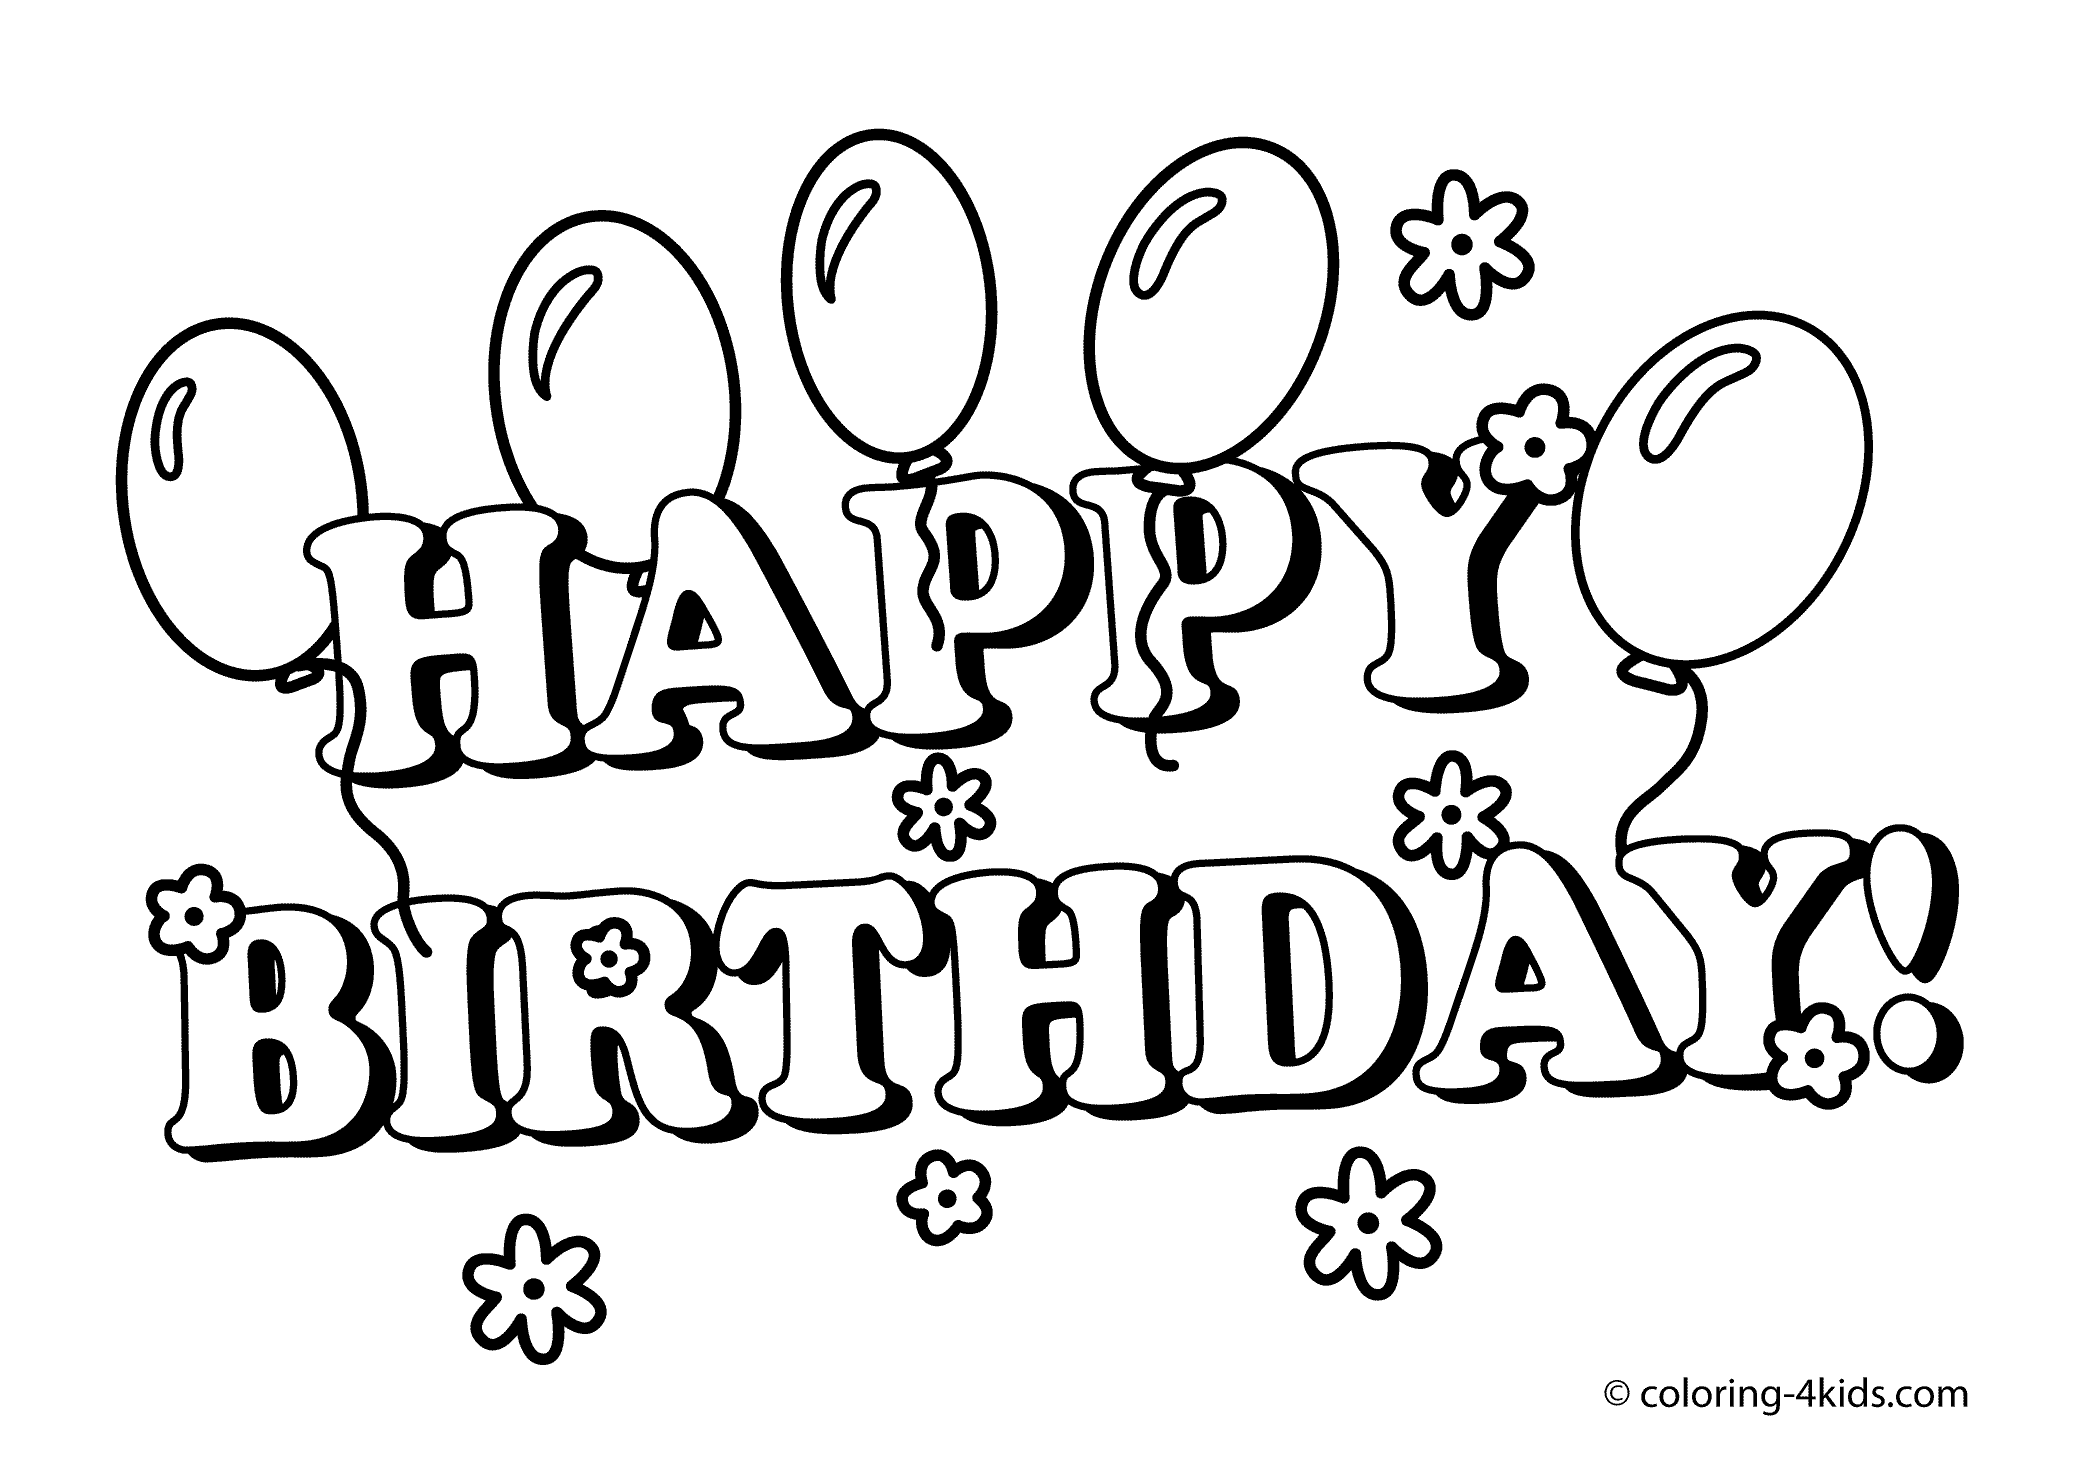 Printable Happy Birthday - Coloring Pages for Kids and for Adults